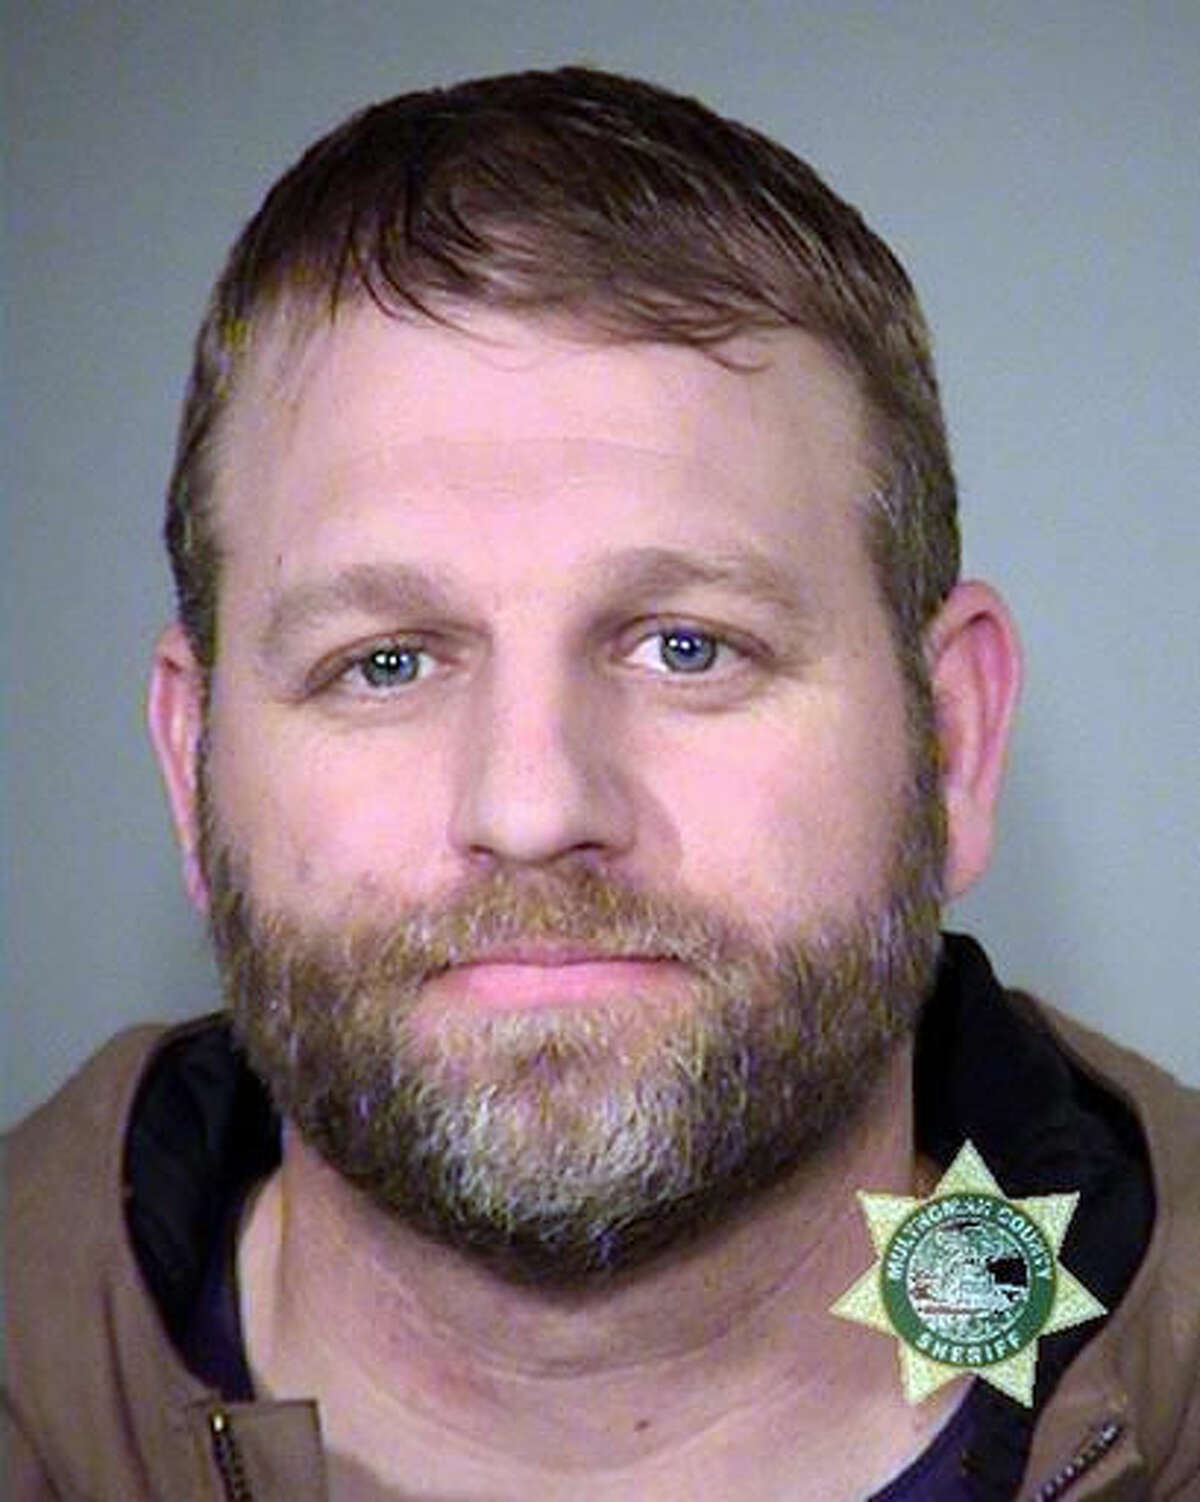 FILE - This Jan. 27, 2016, photo provided by the Multnomah County Sheriff's Office shows Ammon Bundy. Prosecutors want a federal judge in Nevada to schedule three group trials for the 17 defendants facing charges in an armed confrontation with U.S. officials over grazing rights near cattleman Cliven Bundy's ranch. The first trial would start Feb. 6 for the accused conspiracy leaders: Bundy, his sons Ammon and Ryan Bundy, and co-defendants Ryan Payne and Peter Santilli. (Multnomah County Sheriff via AP, file)